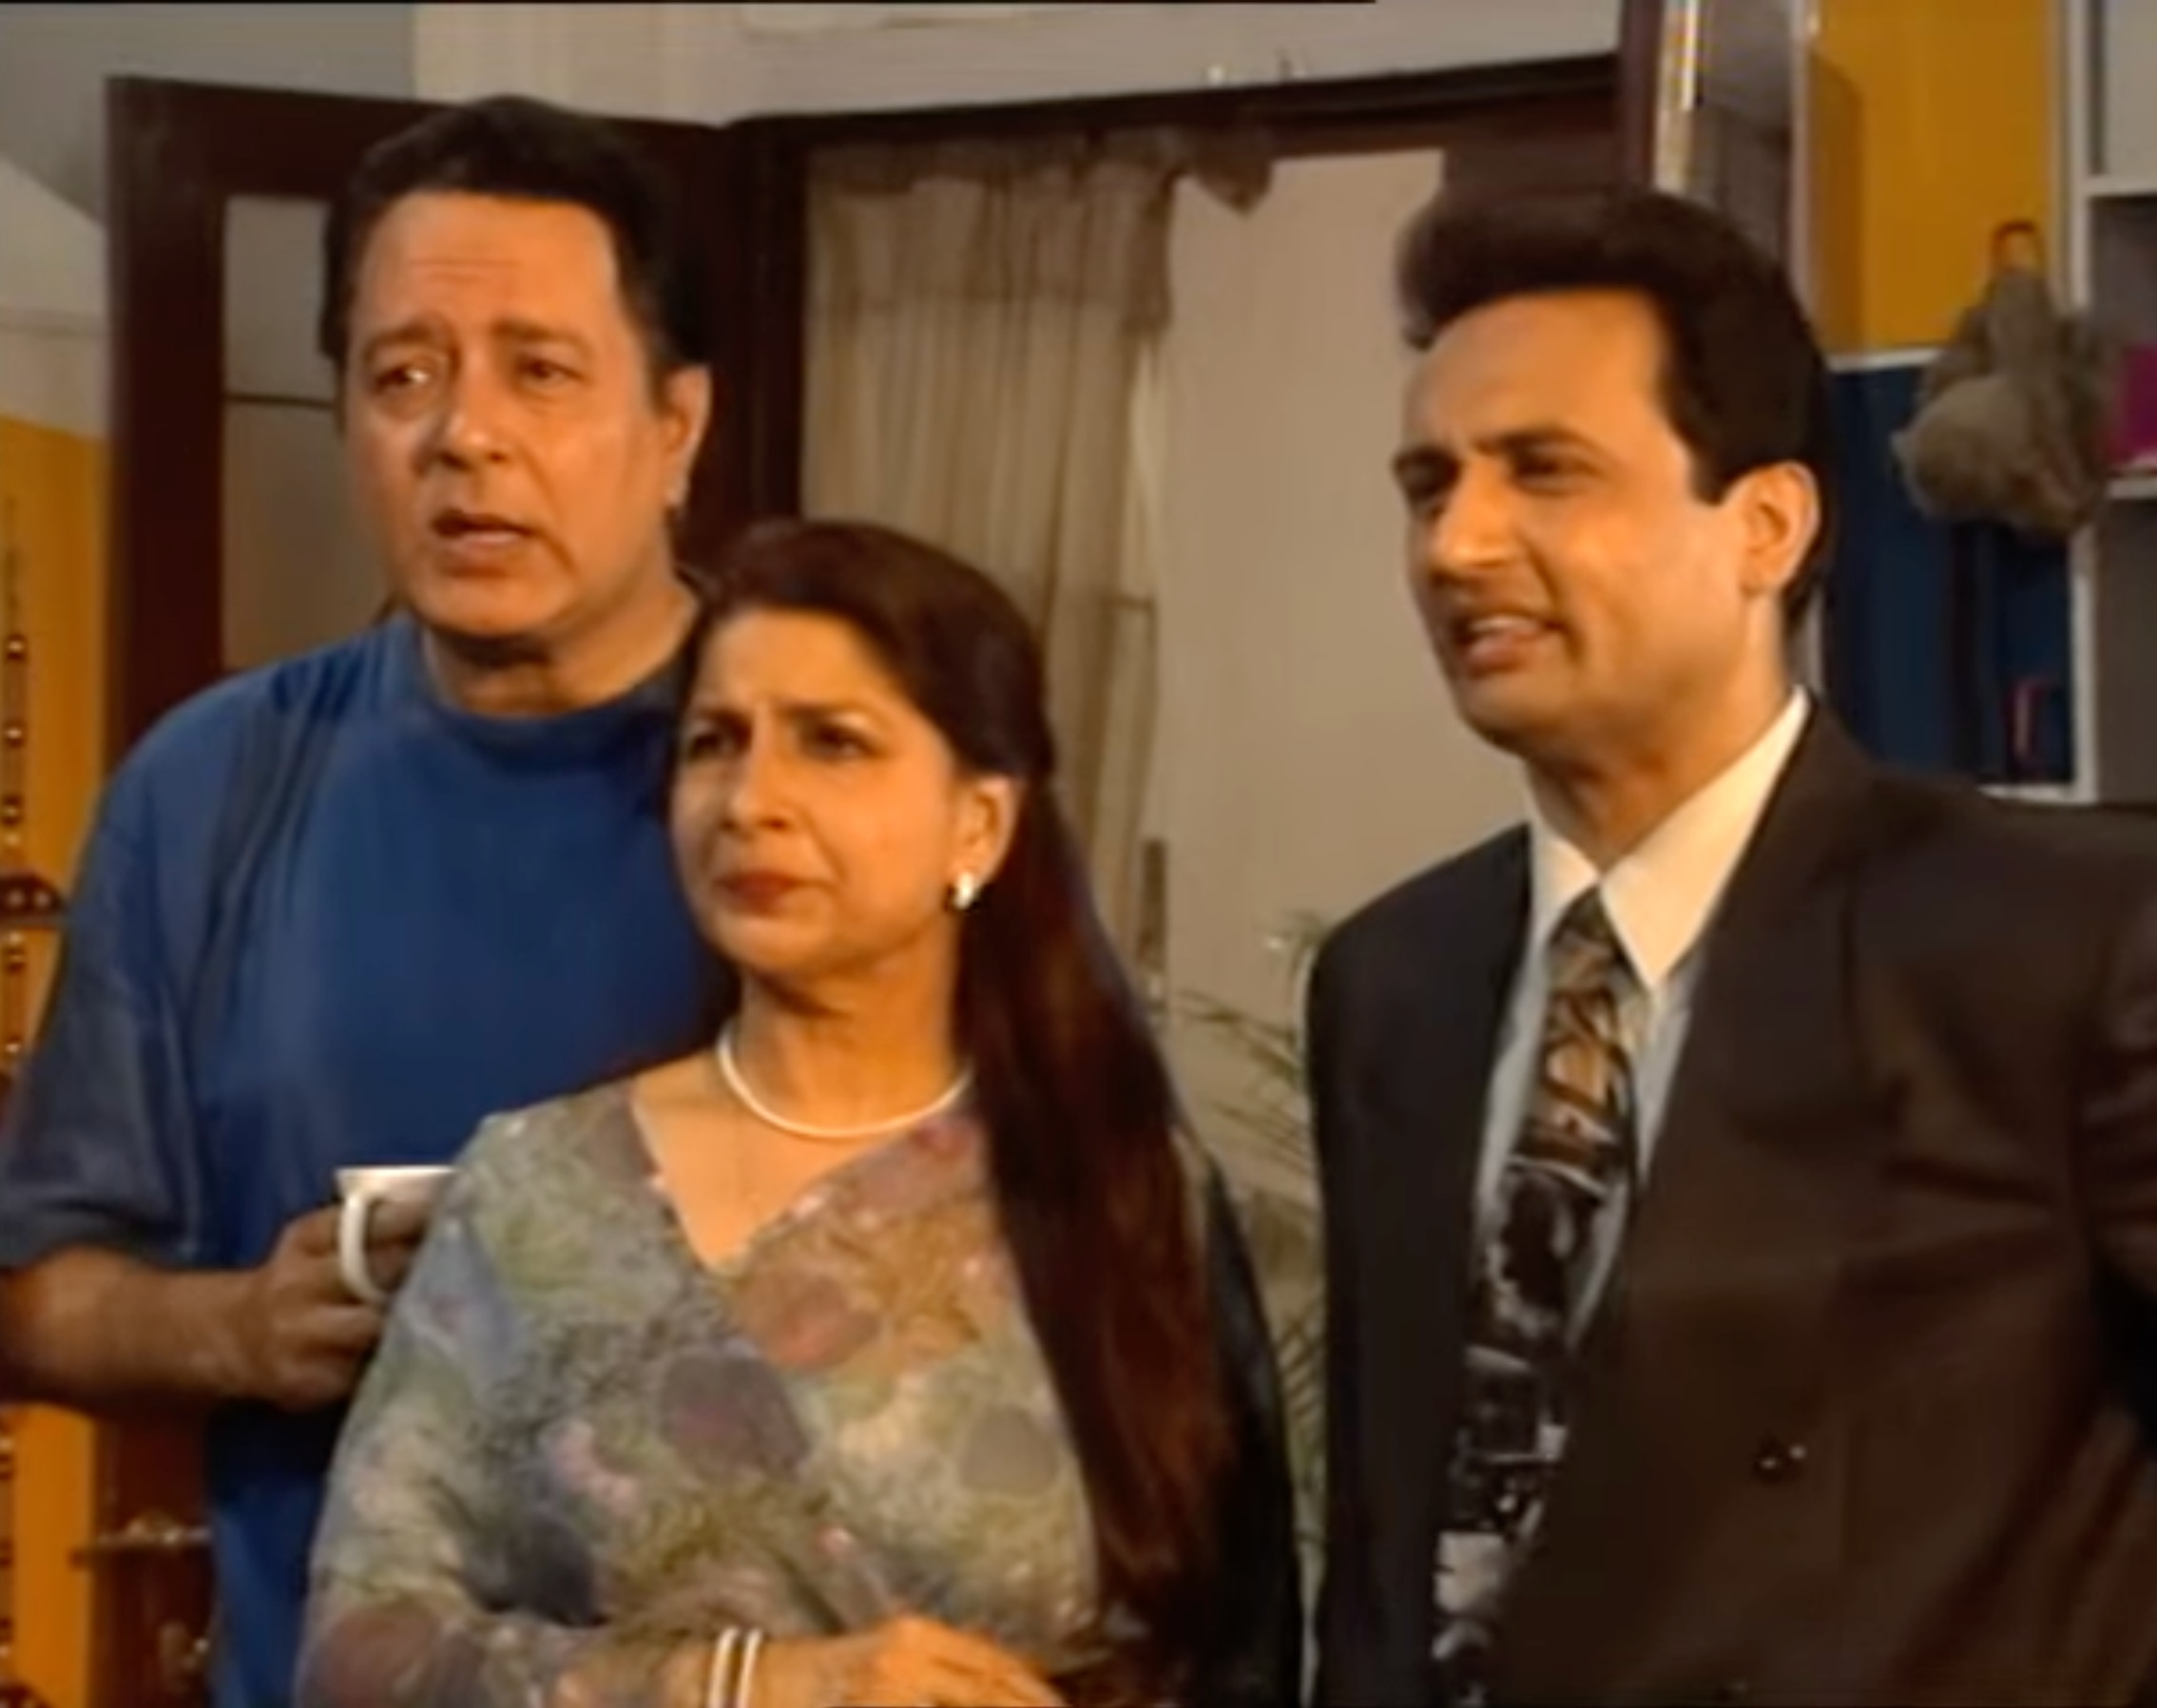 how iconic tv show dekh bhai dekh, which brought families together, was made